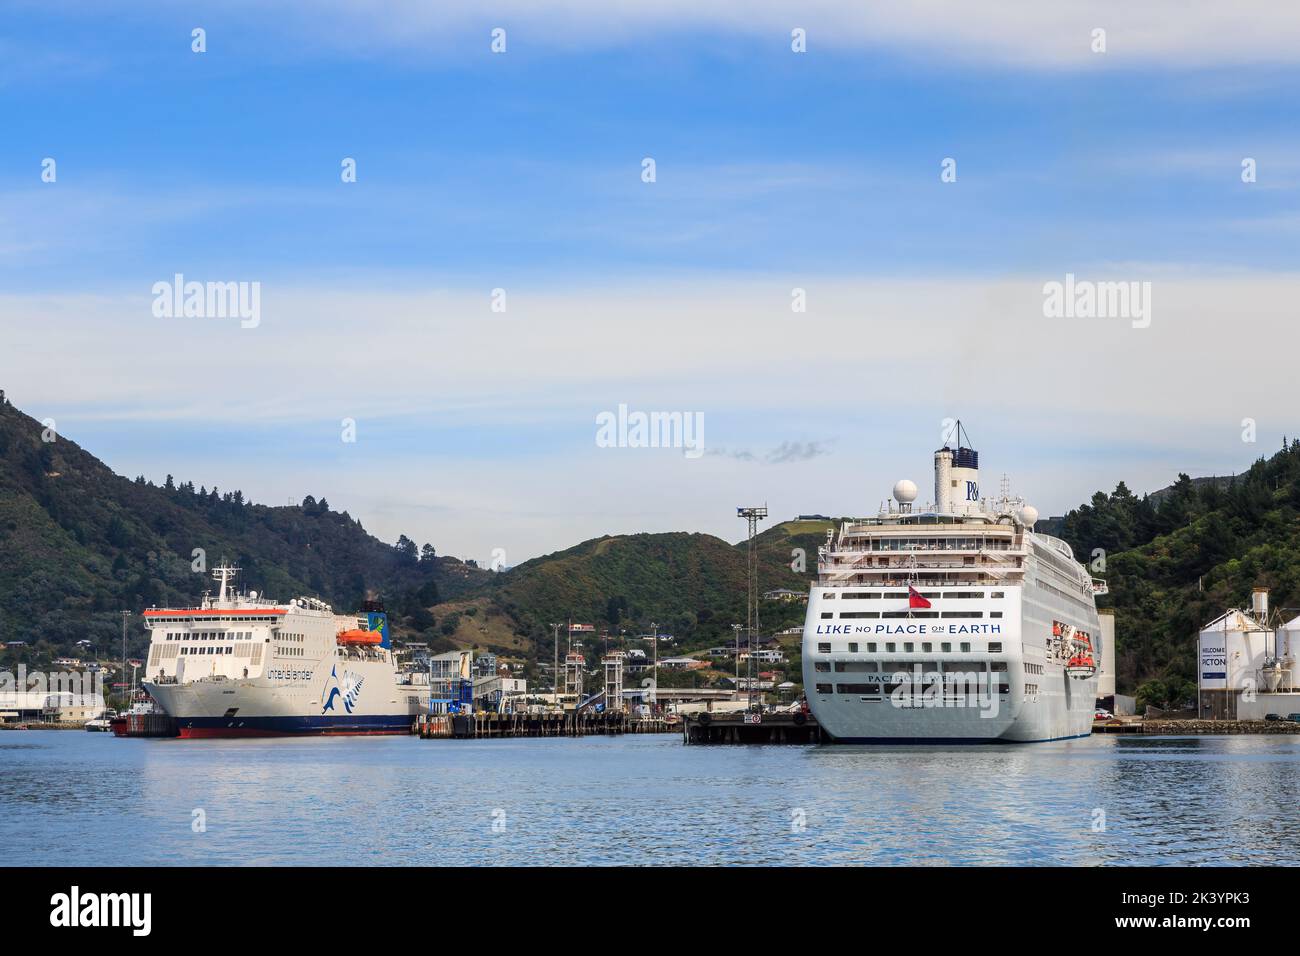 The port of Picton, New Zealand. The Interislander ferry 'Kaitaki' and the P&O cruise ship 'Pacific Jewel' are docked at the wharves Stock Photo